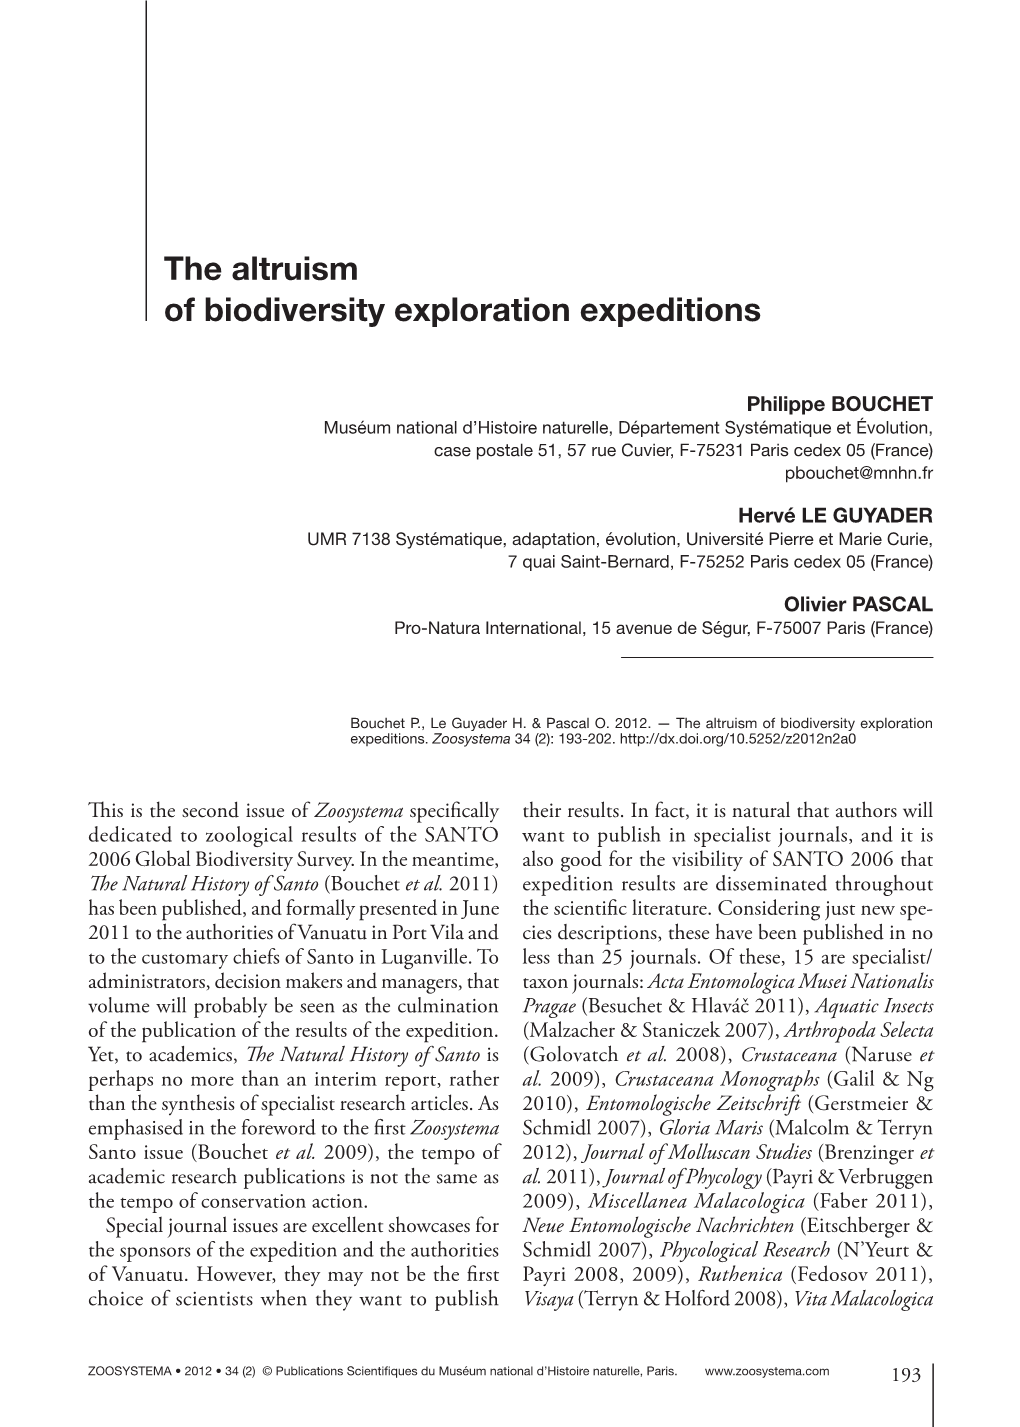 The Altruism of Biodiversity Exploration Expeditions